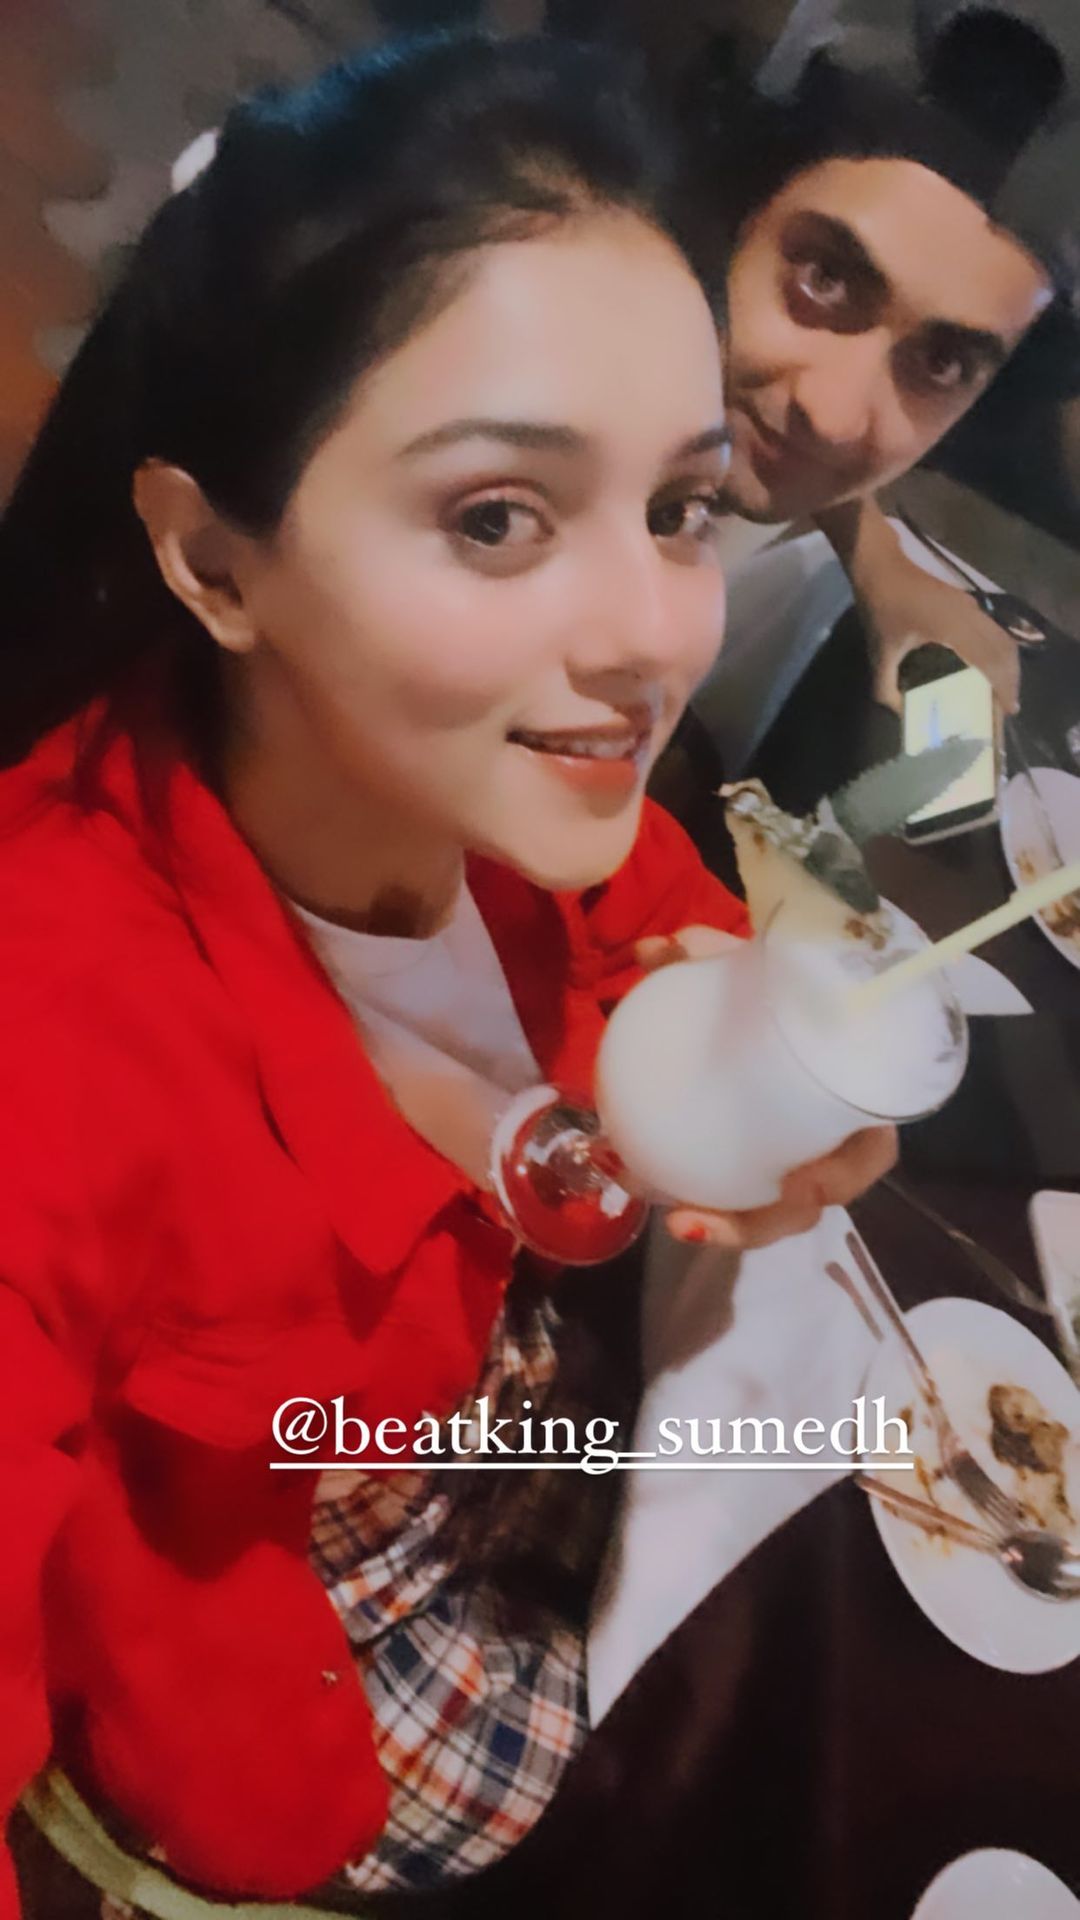 Fun night: Sumedh Mudgalkar and Mallika Singh's romantic dinner picture goes viral